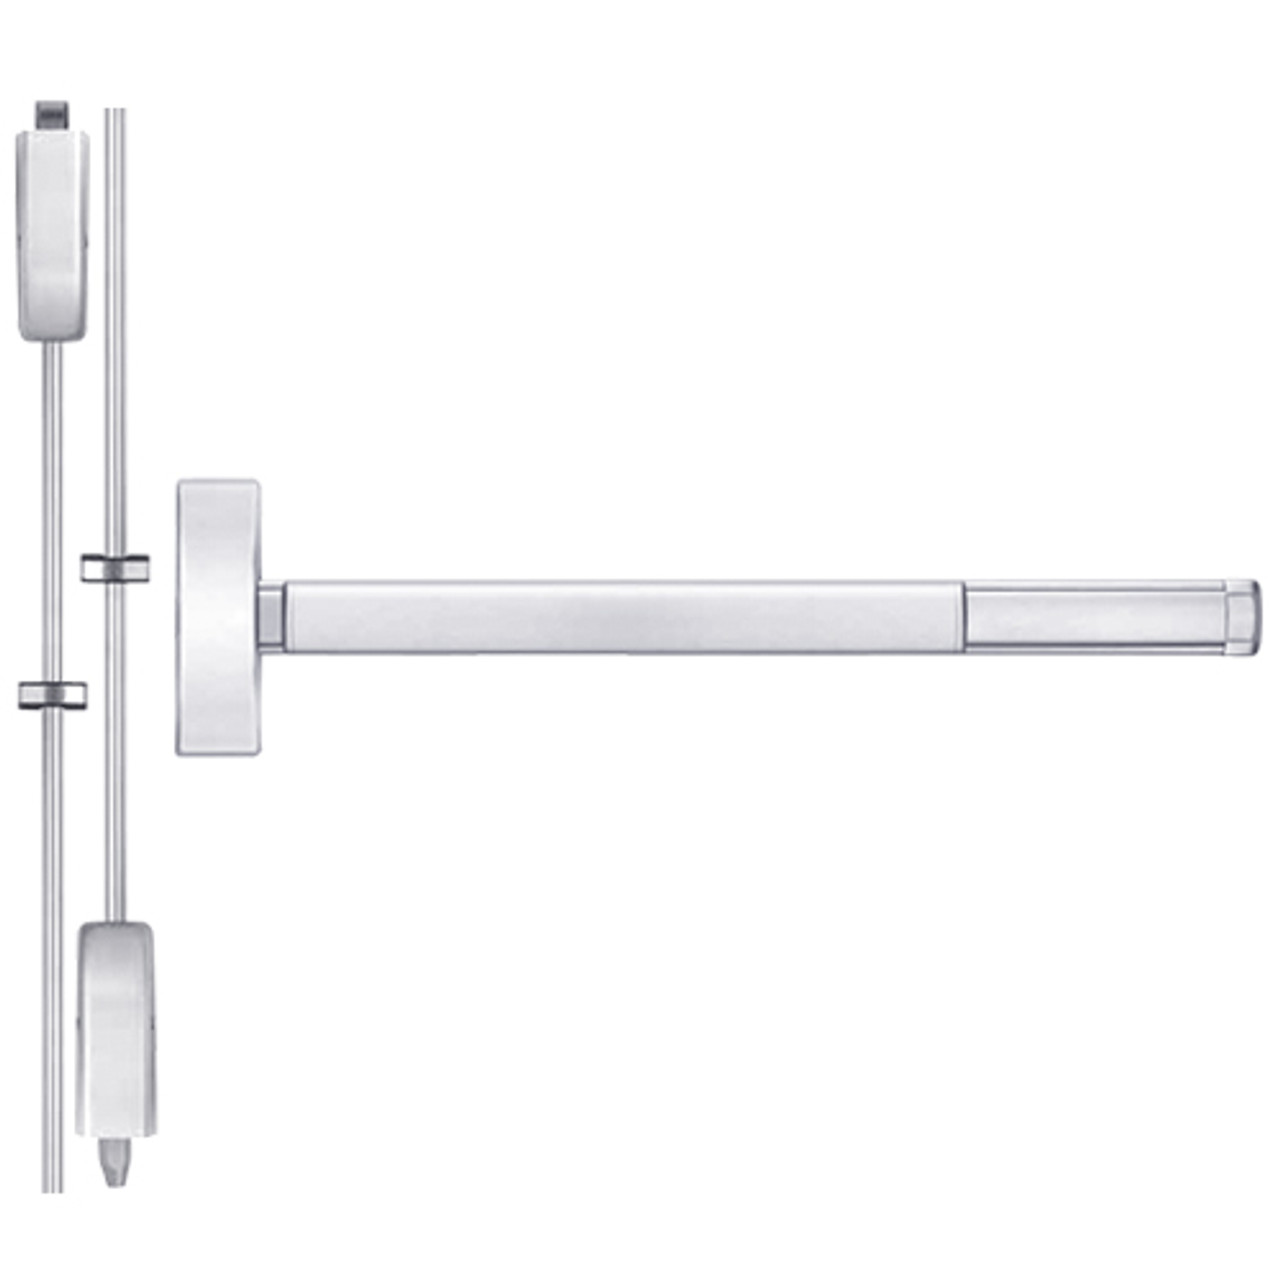 TS2215LBR-625-48 PHI 2200 Series Non Fire Rated Apex Surface Vertical Rod Device with Touchbar Monitoring Switch Prepped for Thumb Piece Always Active in Bright Chrome Finish